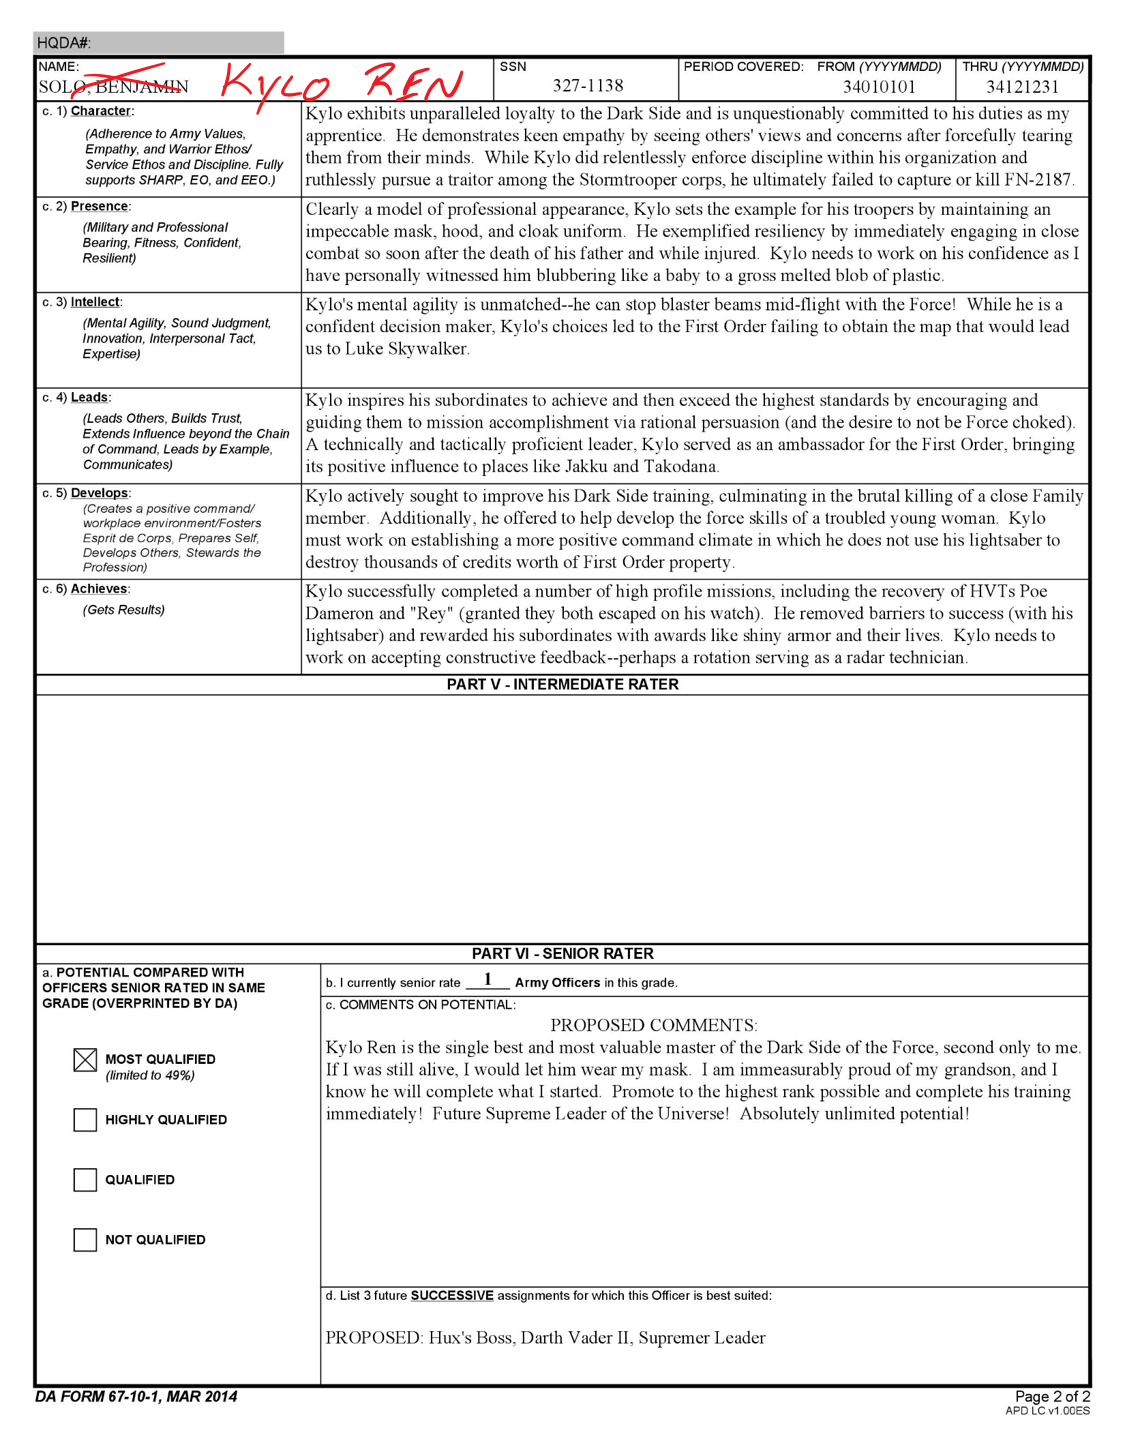 oer support form example platoon leader